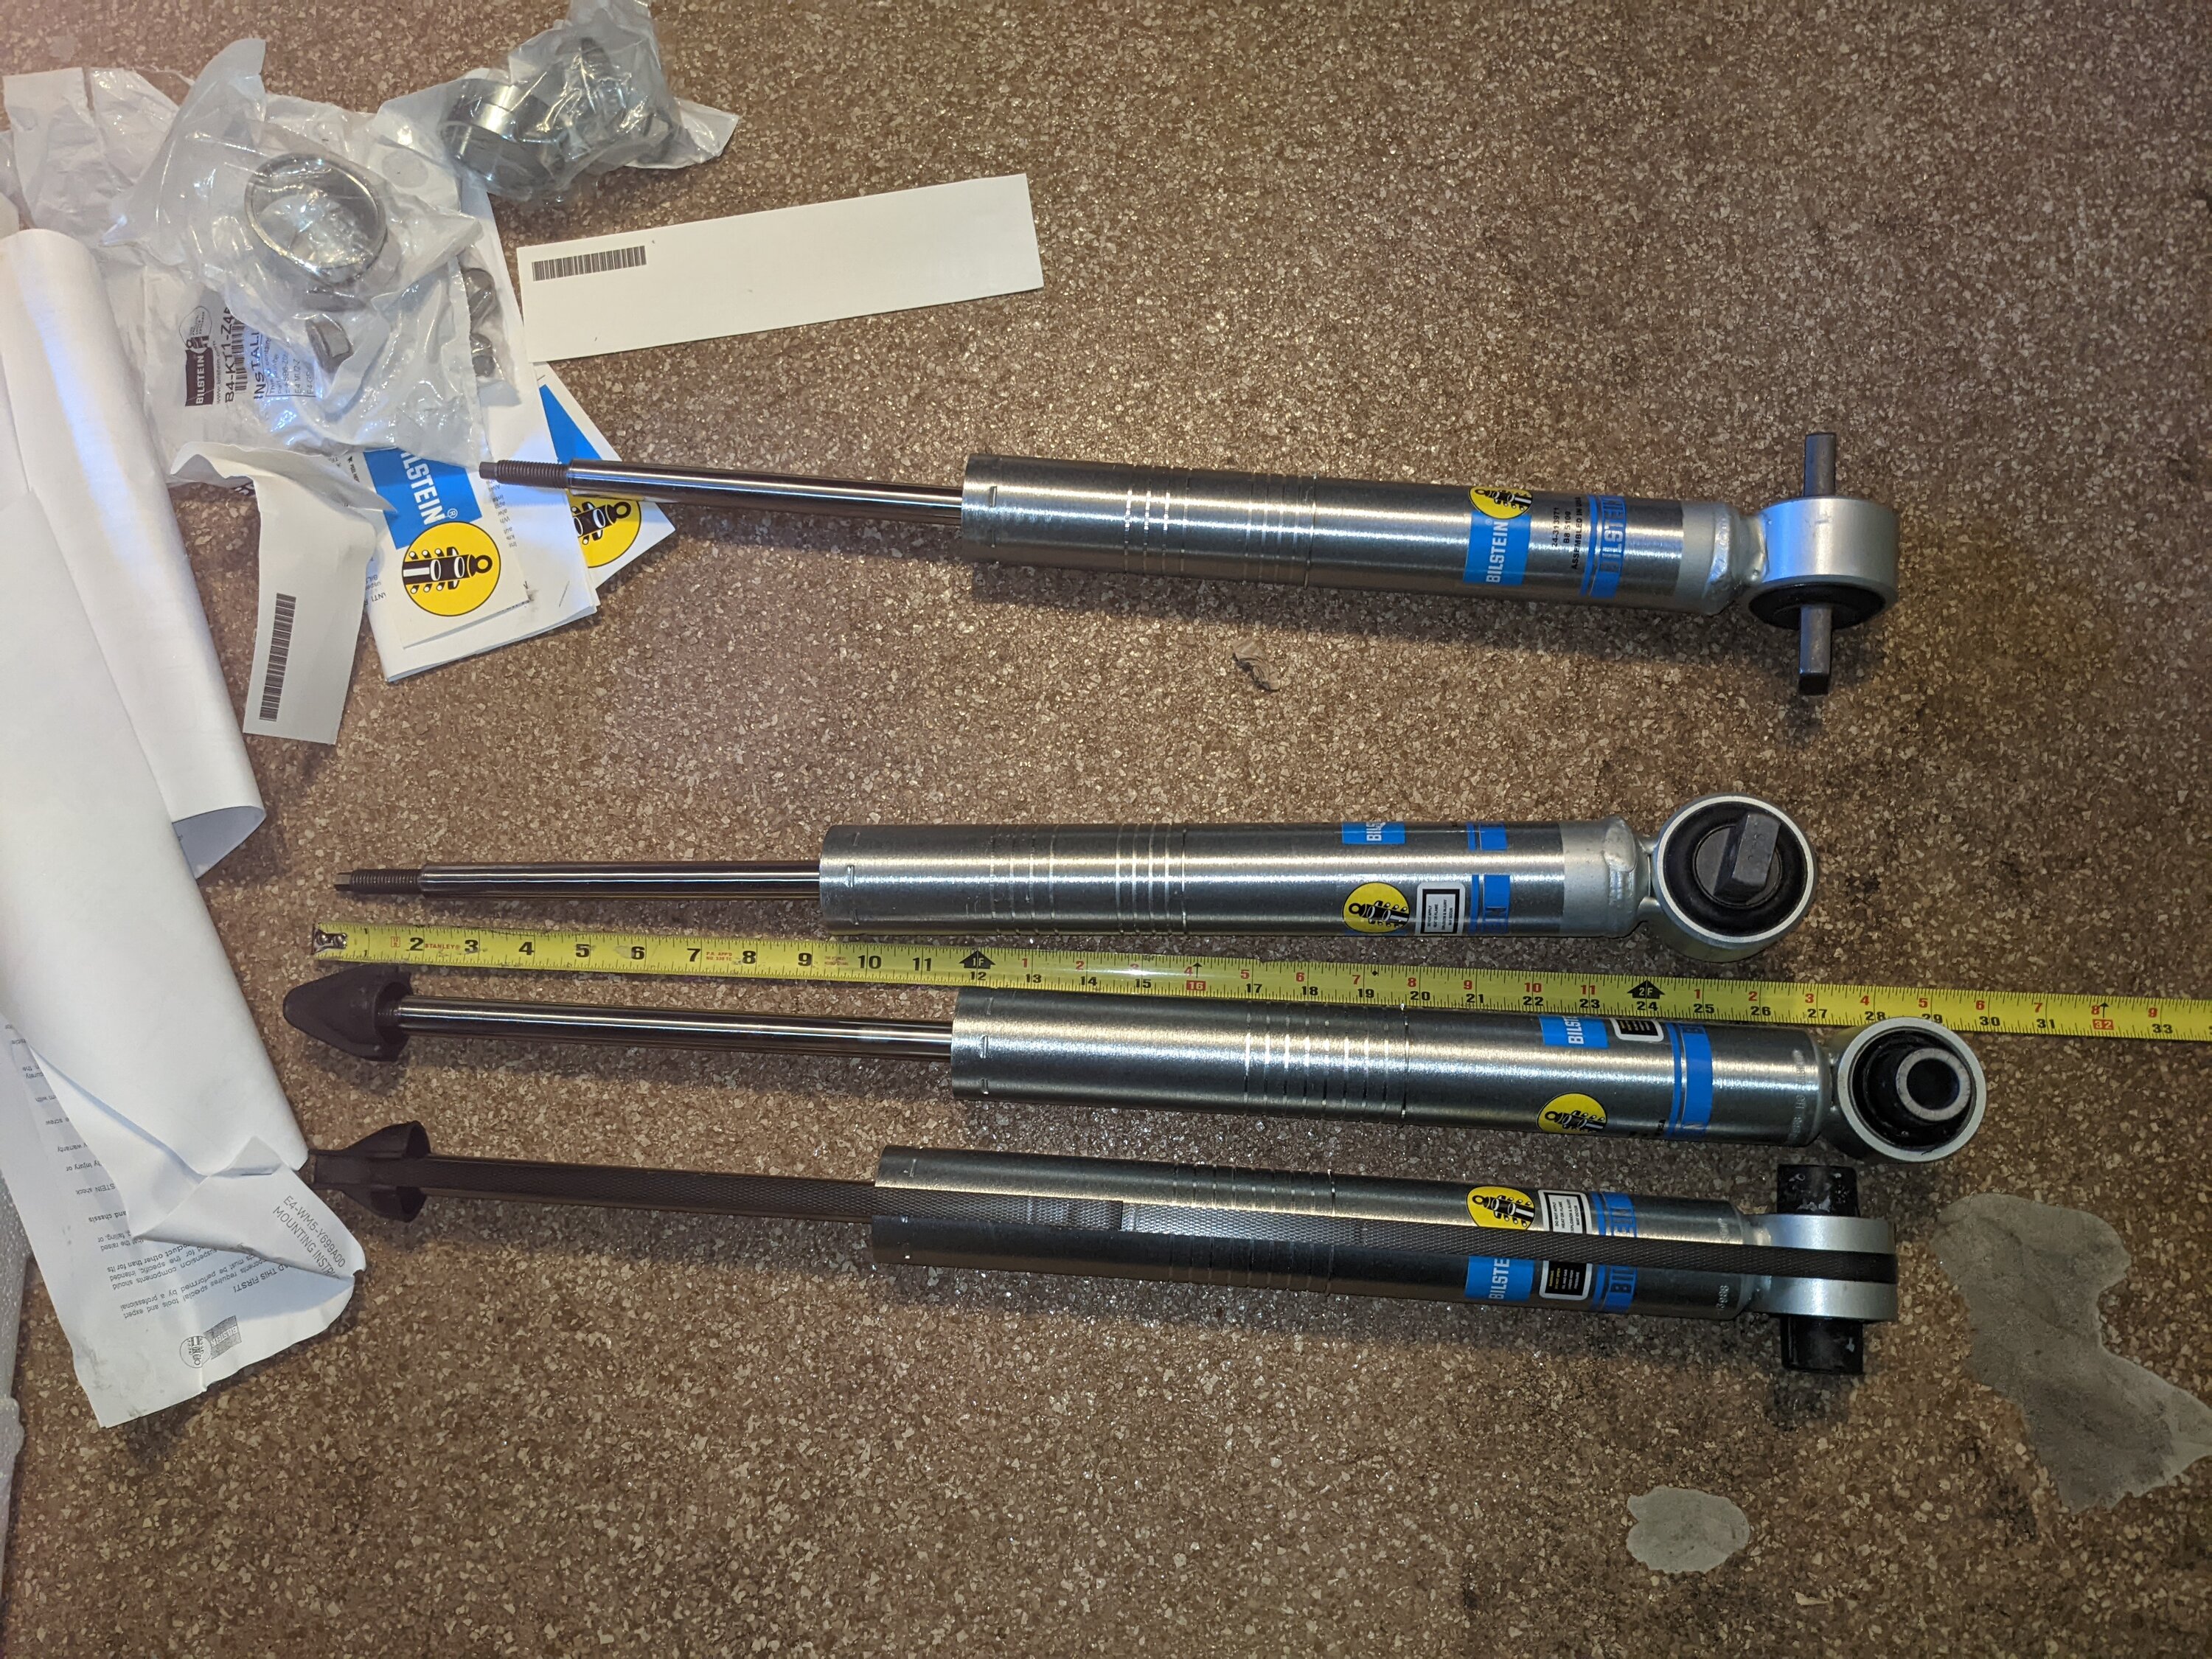 Ford Bronco Bilstein 5100 adjustable lift shocks installed. Before & after pics (updated with Wildtrak tires & wheels) PXL_20220901_213925954